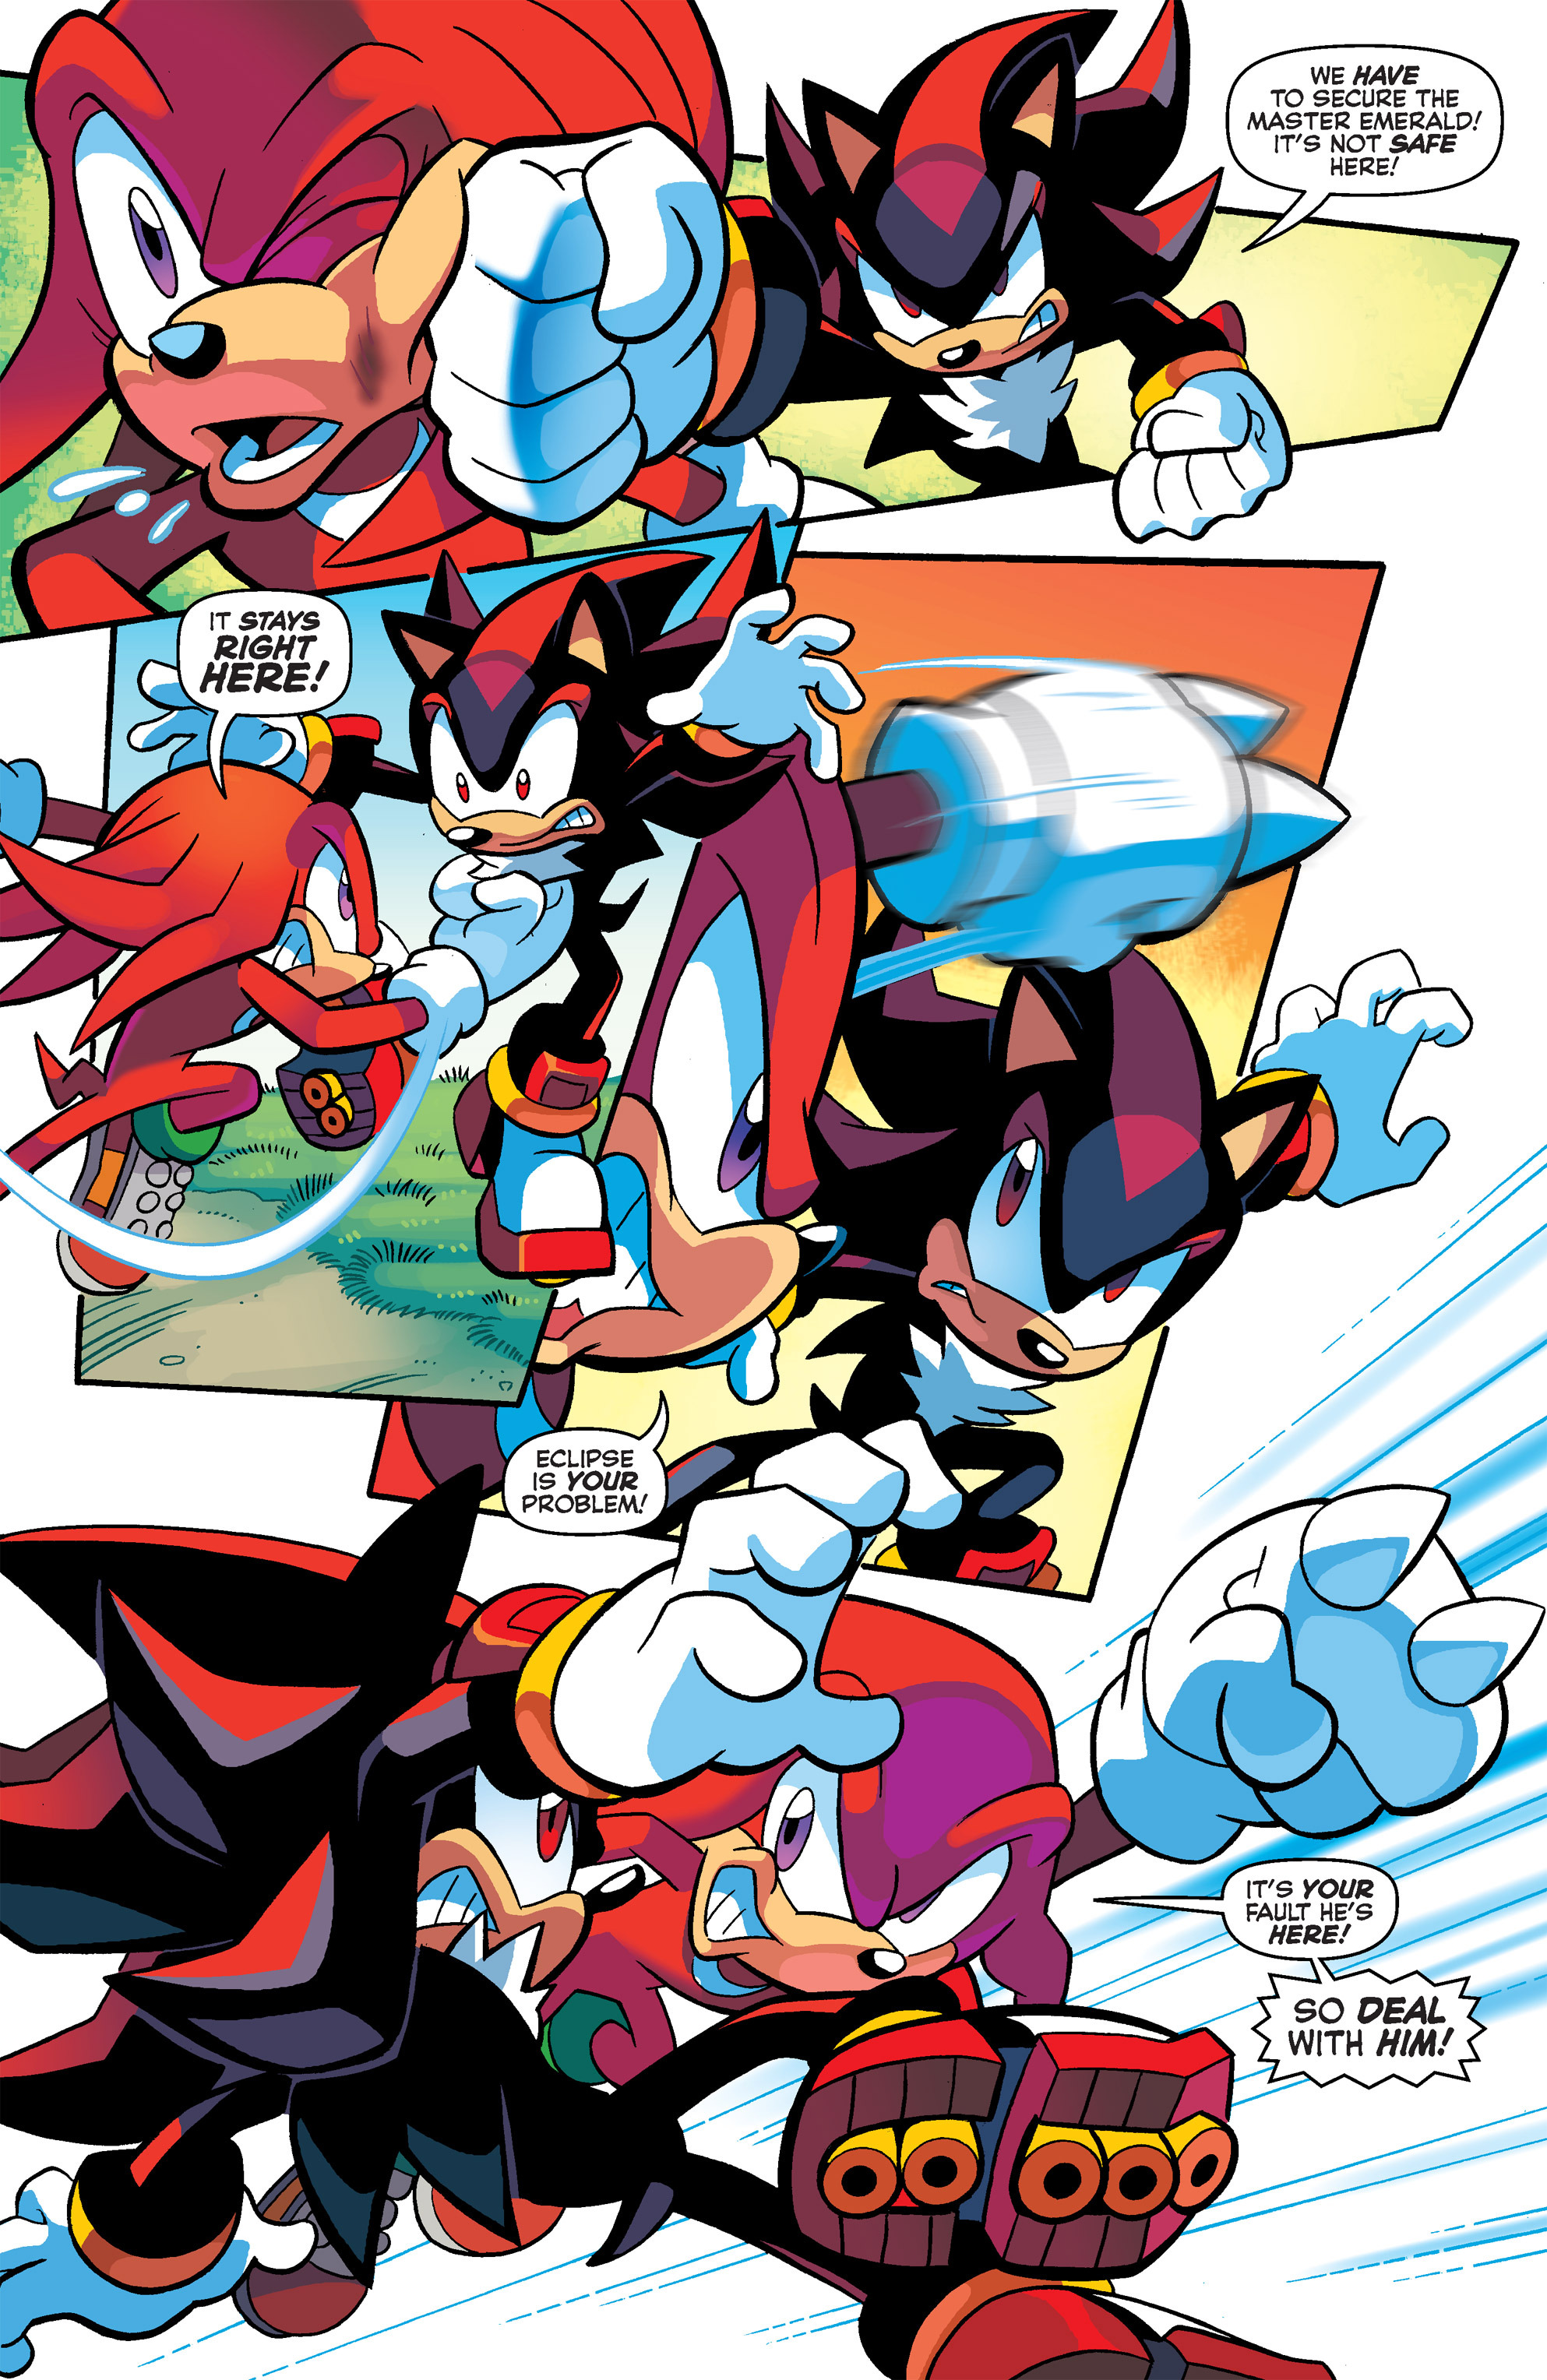 shadow the hedgehog (archie) | sonic news network